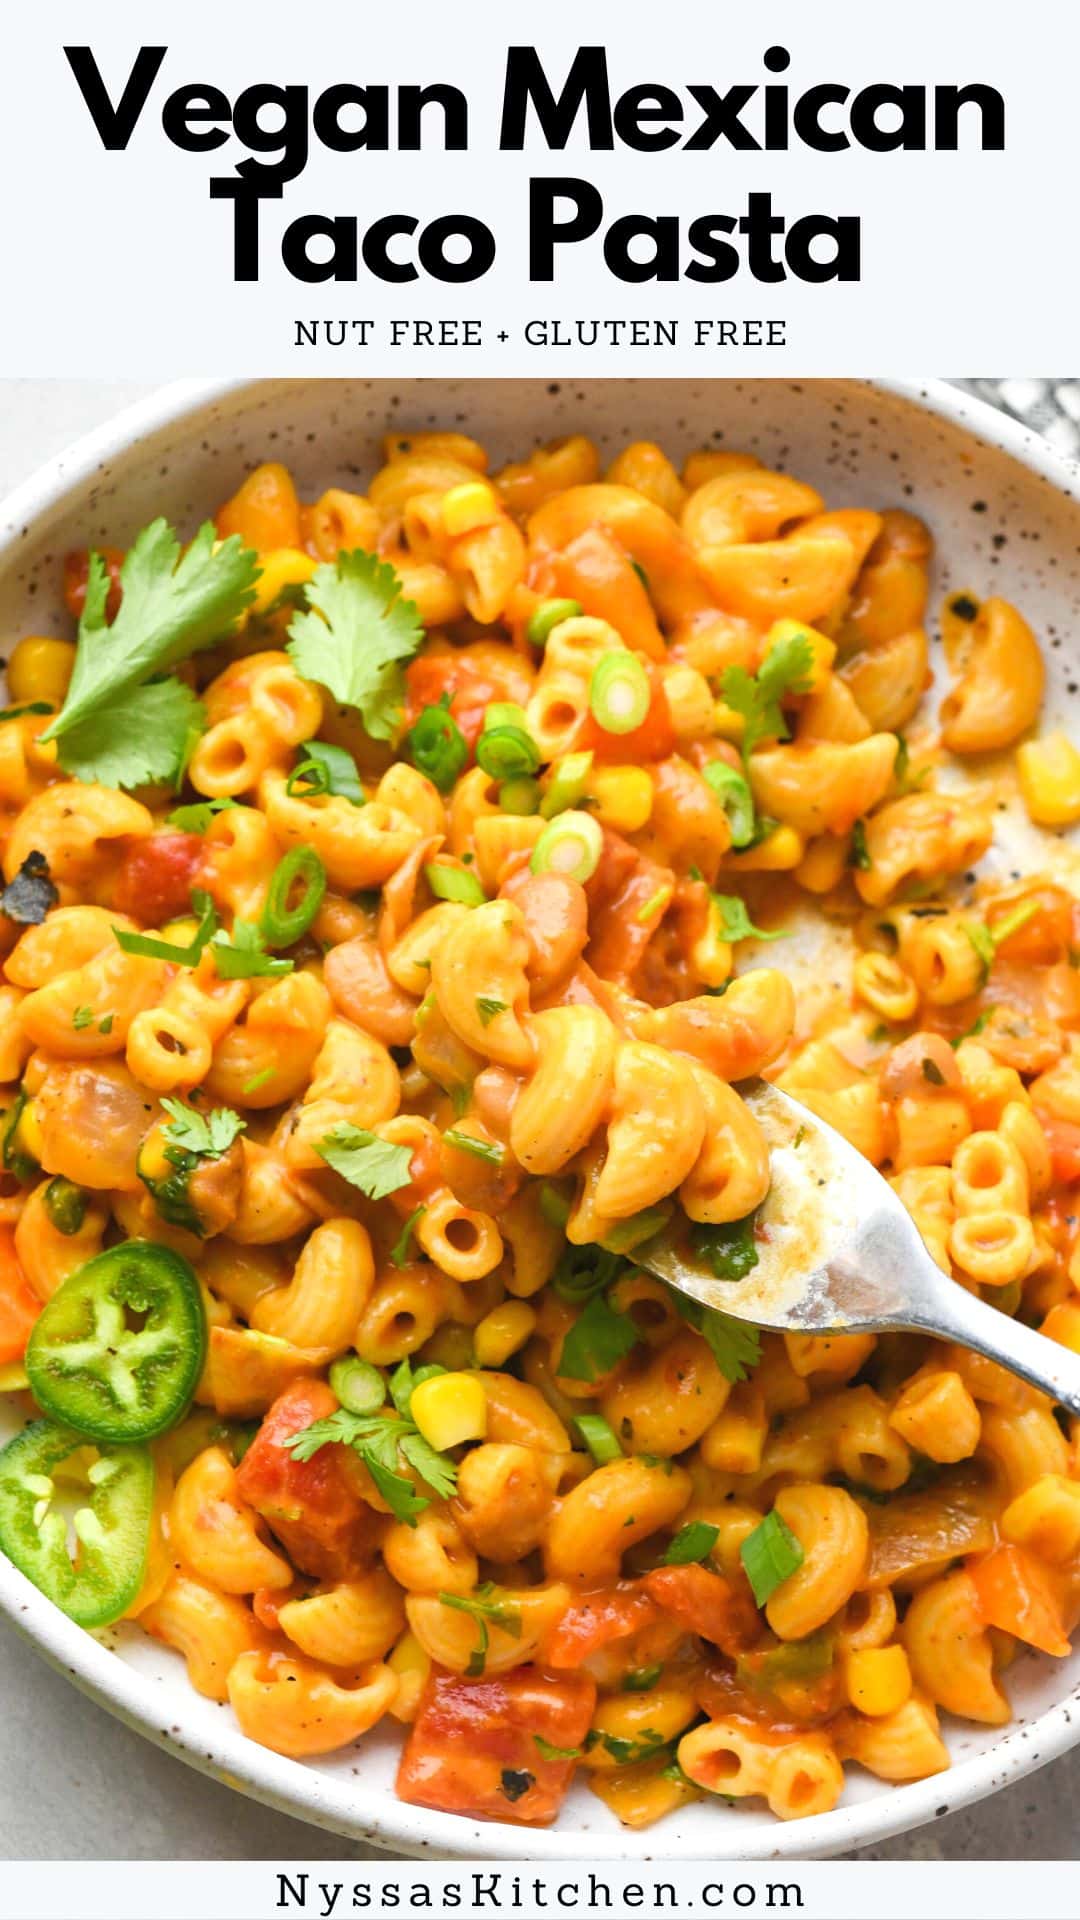 This vegan Mexican taco pasta is a delicious dairy free & gluten free comfort food meal with some serious southwest mac and cheese vibes. Made on the stove top with a nut free cheese sauce, sweet corn, pinto beans, bell pepper, tomatoes, and some sneaky veggies. A healthy meat free recipe that is FULL of flavor and good-for-you ingredients! Vegan, vegetarian, gluten free, nut free.